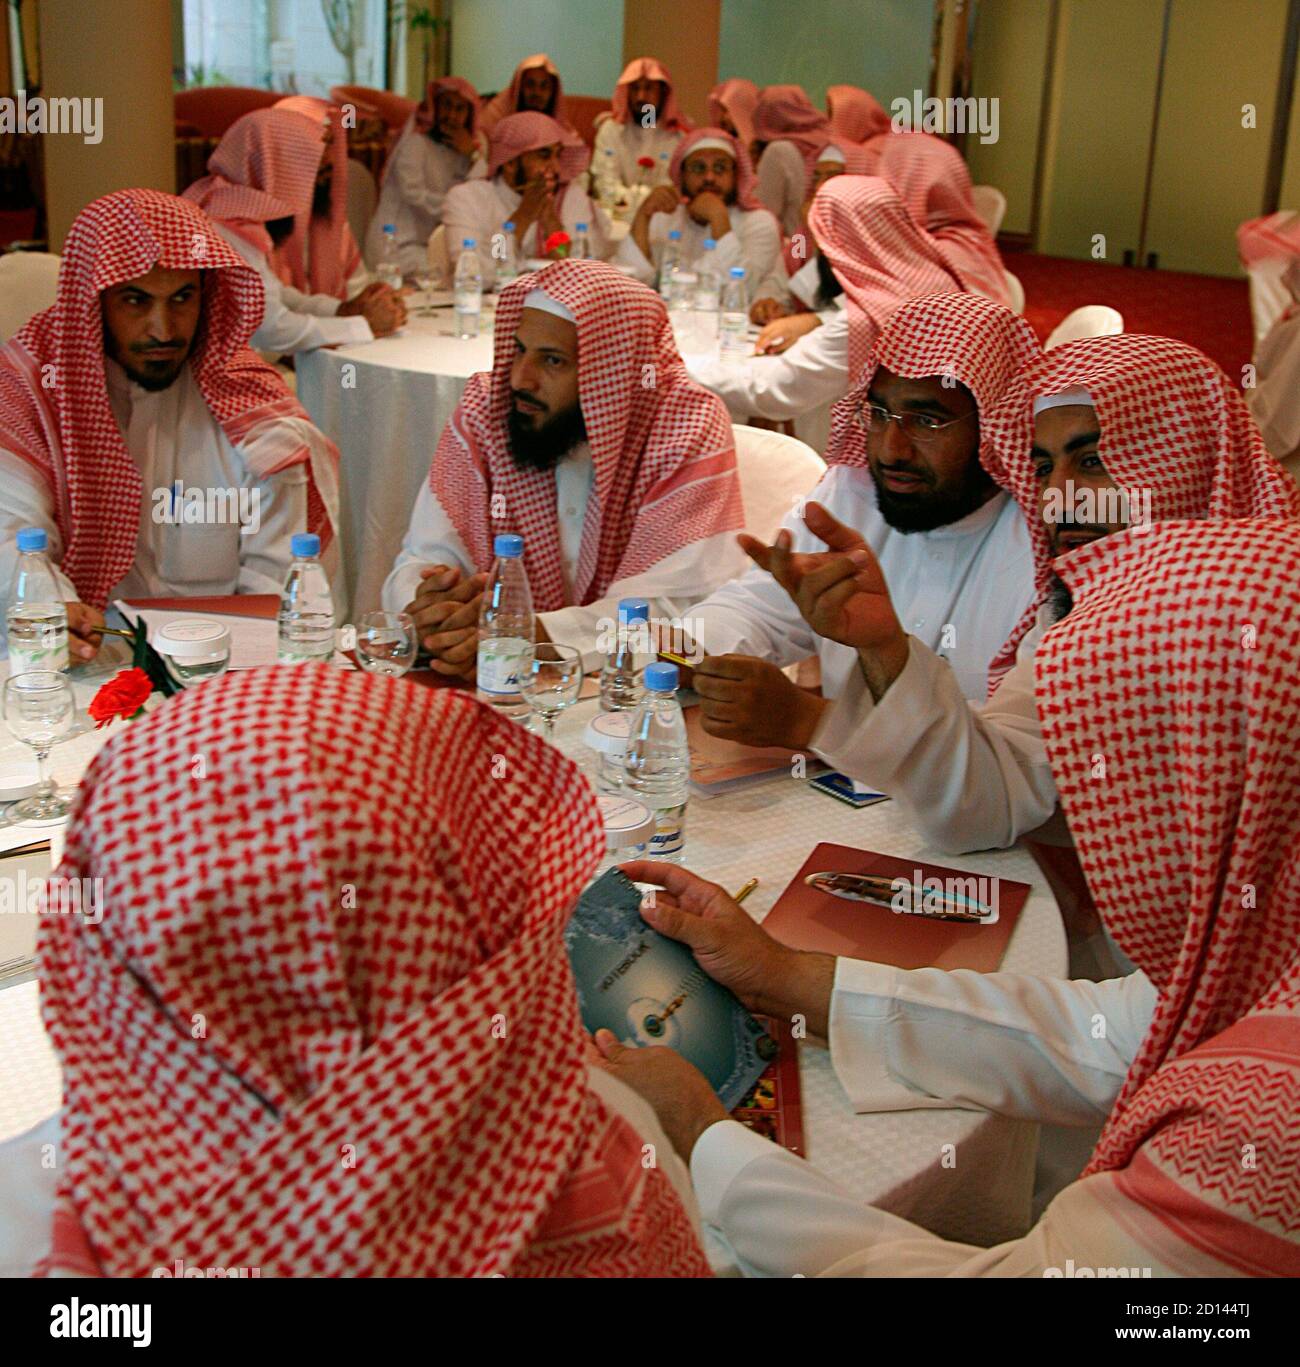 Saudi members of the Committee for the Promotion of Virtue and Prevention of Vice, or religious police, attend a training course in Riyadh September 1, 2007.  REUTERS/Ali Jarekji  (SAUDI ARABIA) Stock Photo